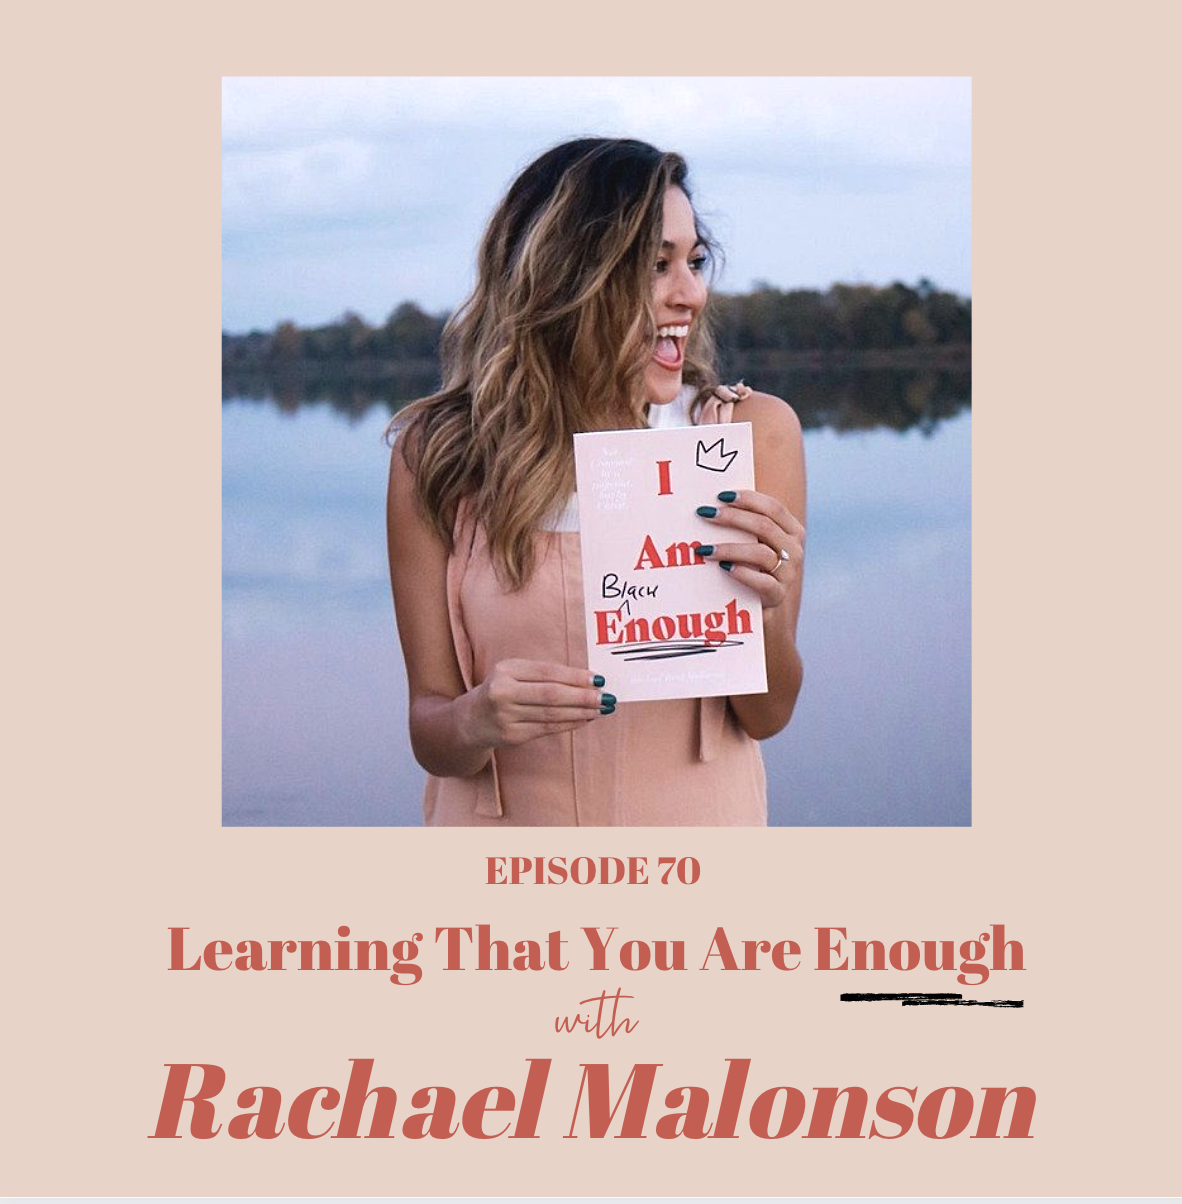 Episode 70: Learning That You Are Enough with Rachael Malonson